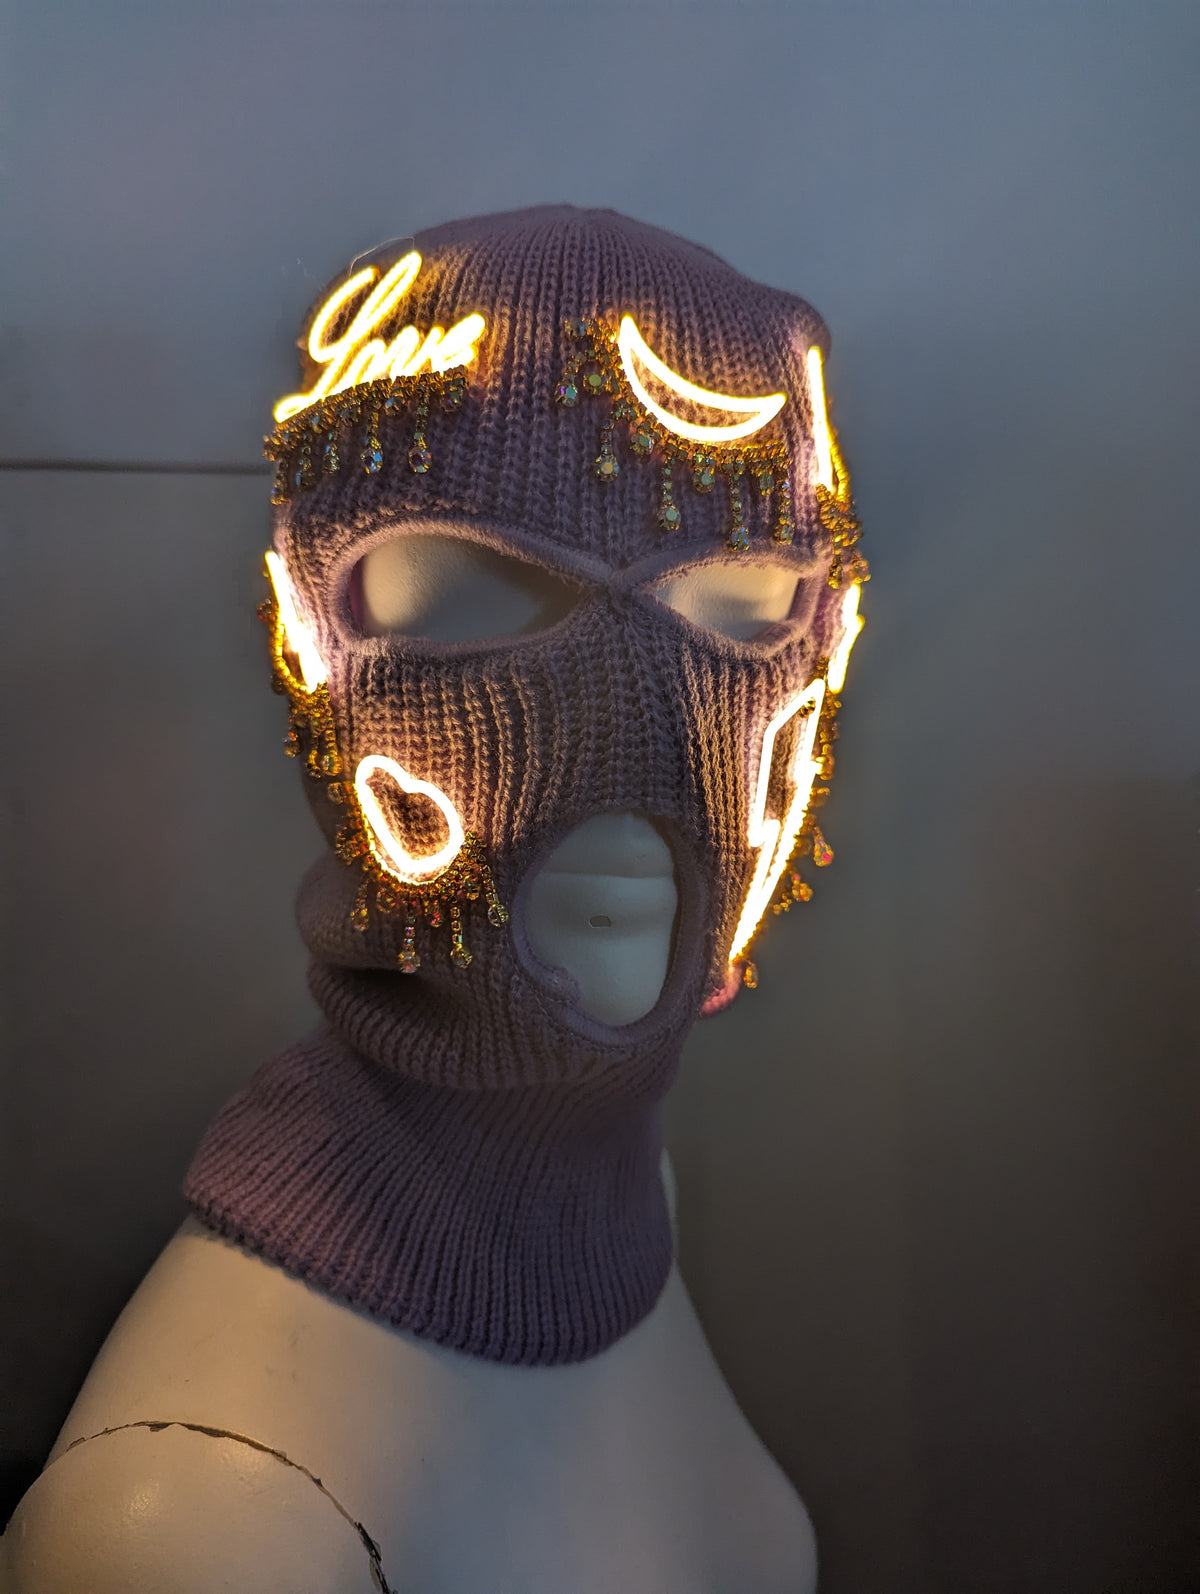 Neon Patched Balaclava